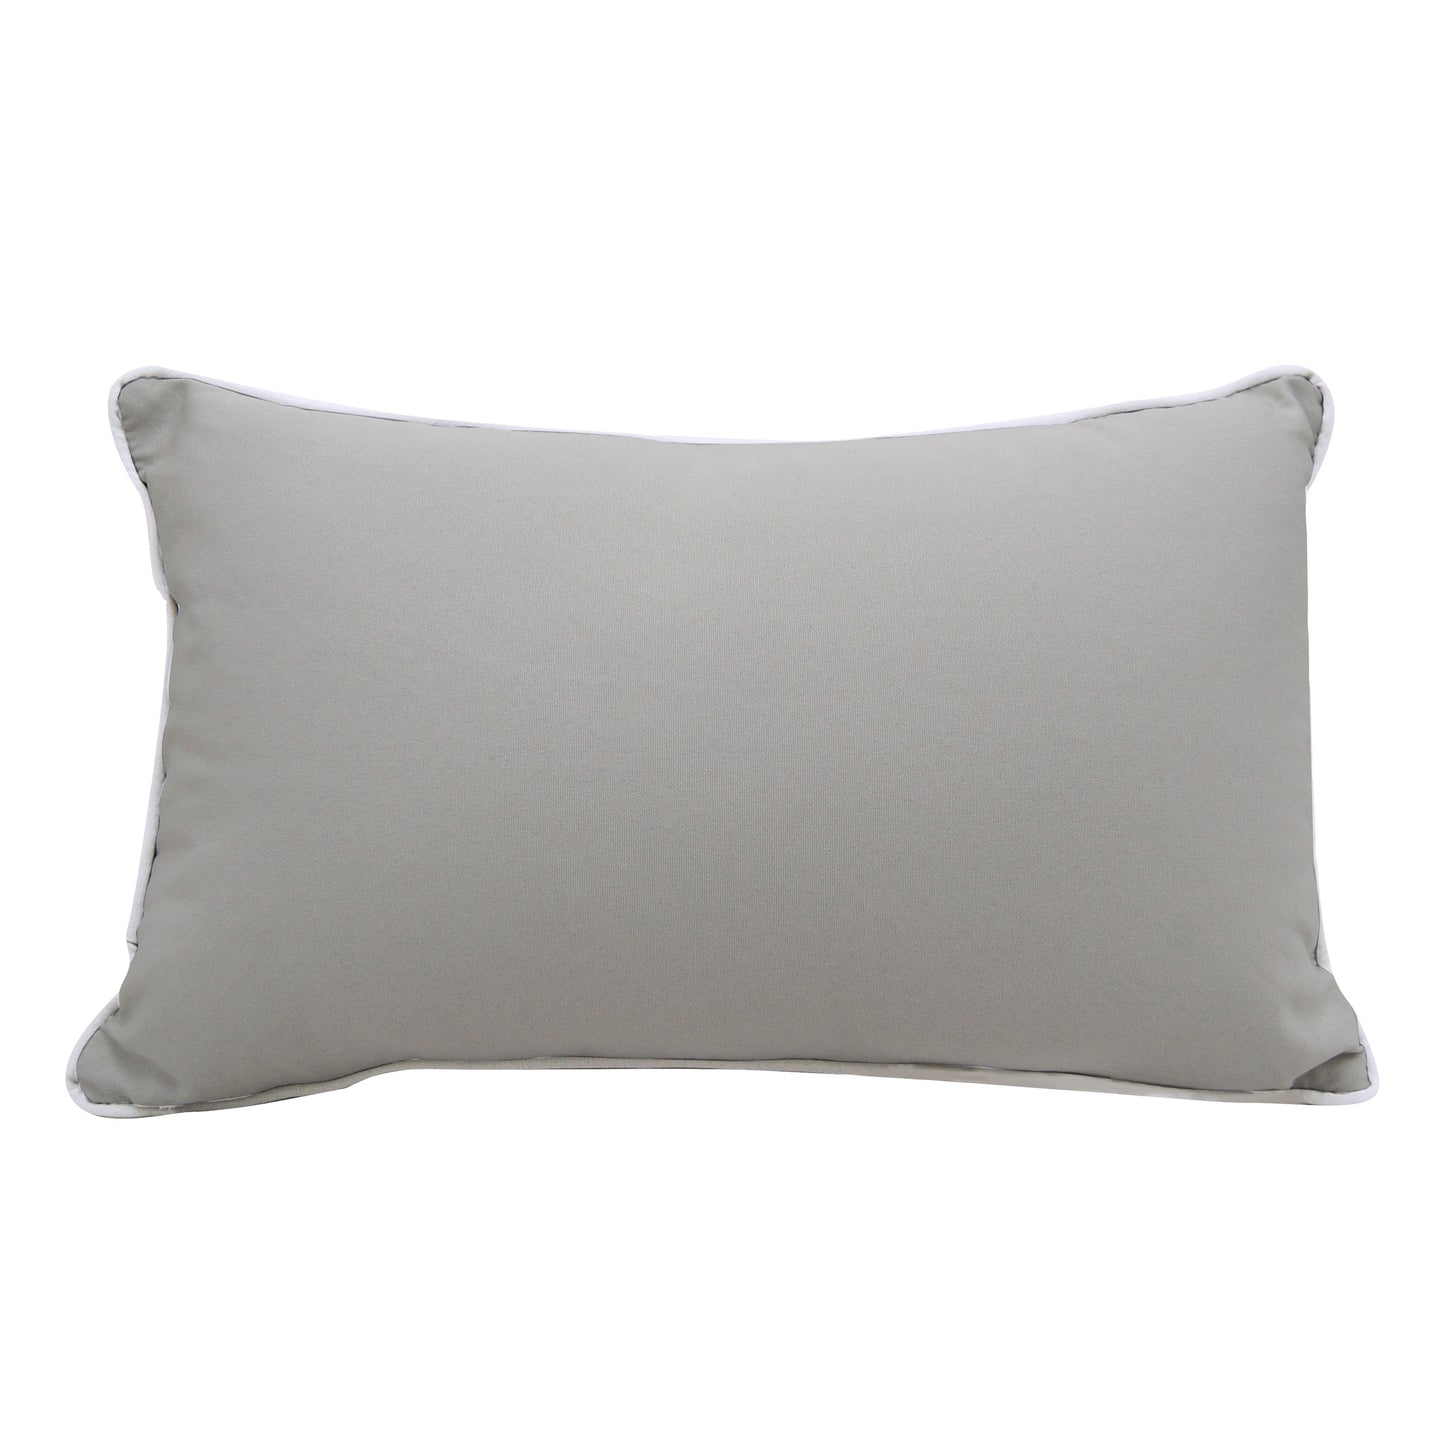 Solid tan fabric; back of the Seagull Flash Mob Lumbar Indoor Outdoor Pillow.